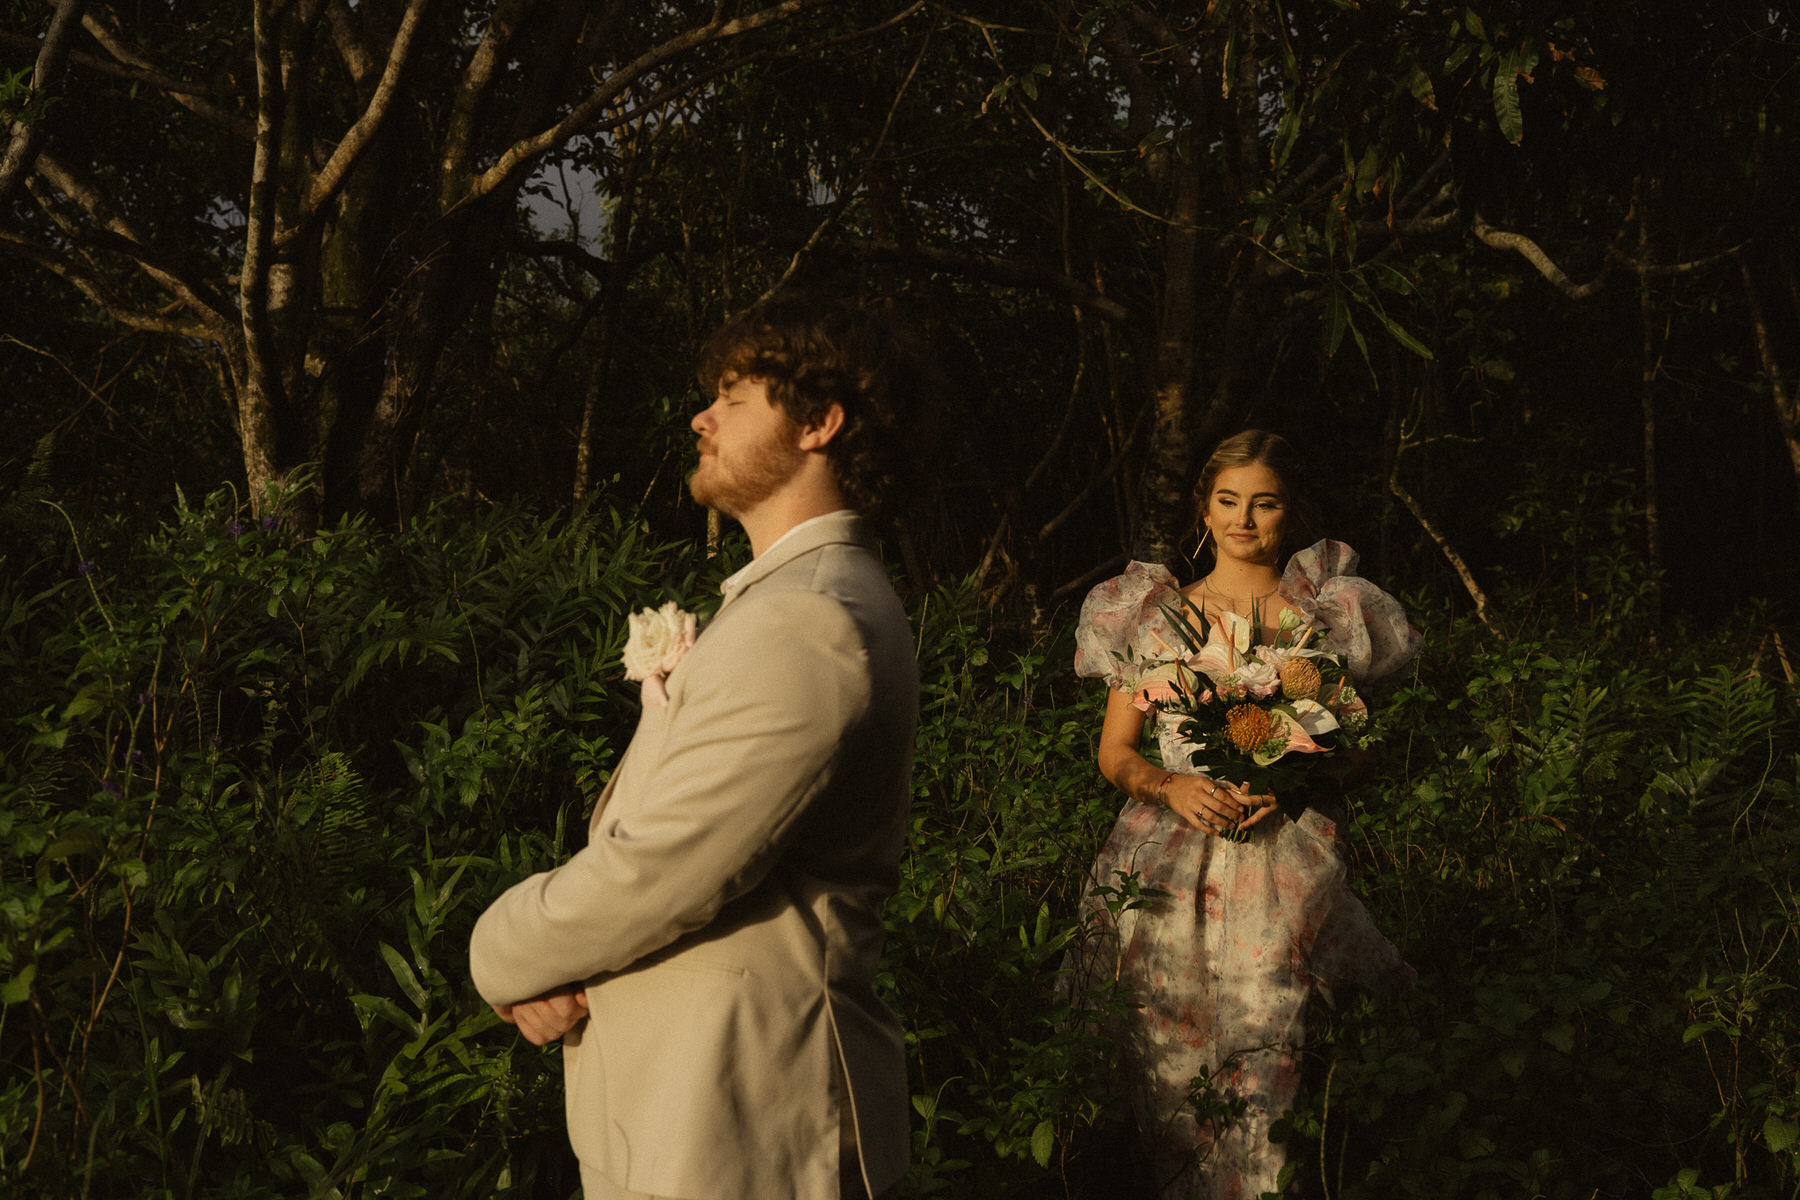 A man in a light beige suit stands with his arms crossed and eyes closed while a woman in a floral dress holding a bouquet stands behind him in a forested area, ready to break the norms at their elopement.